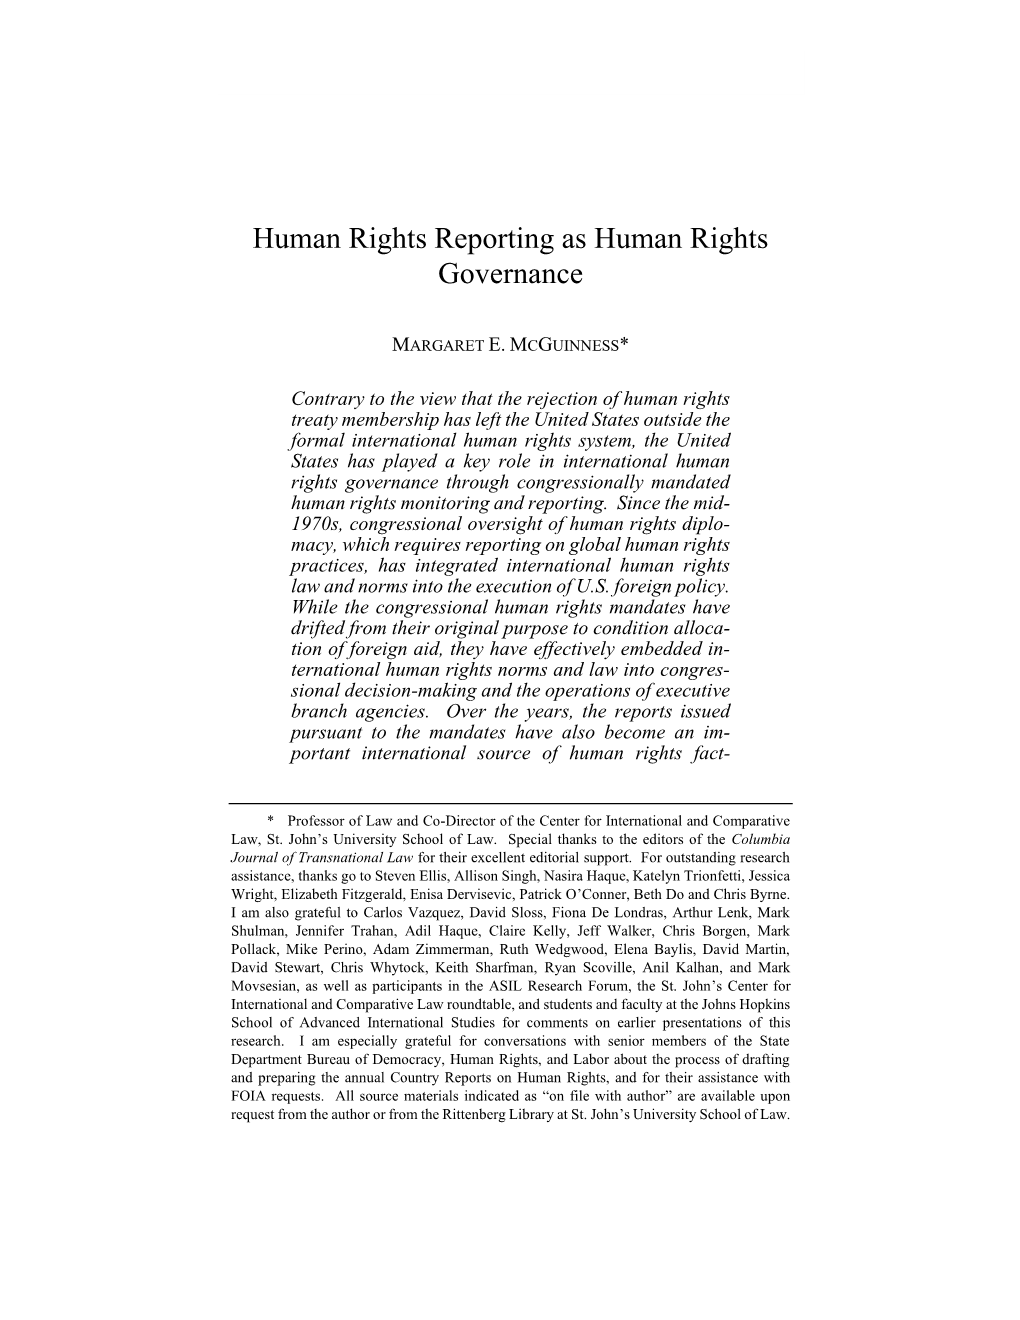 Human Rights Reporting As Human Rights Governance